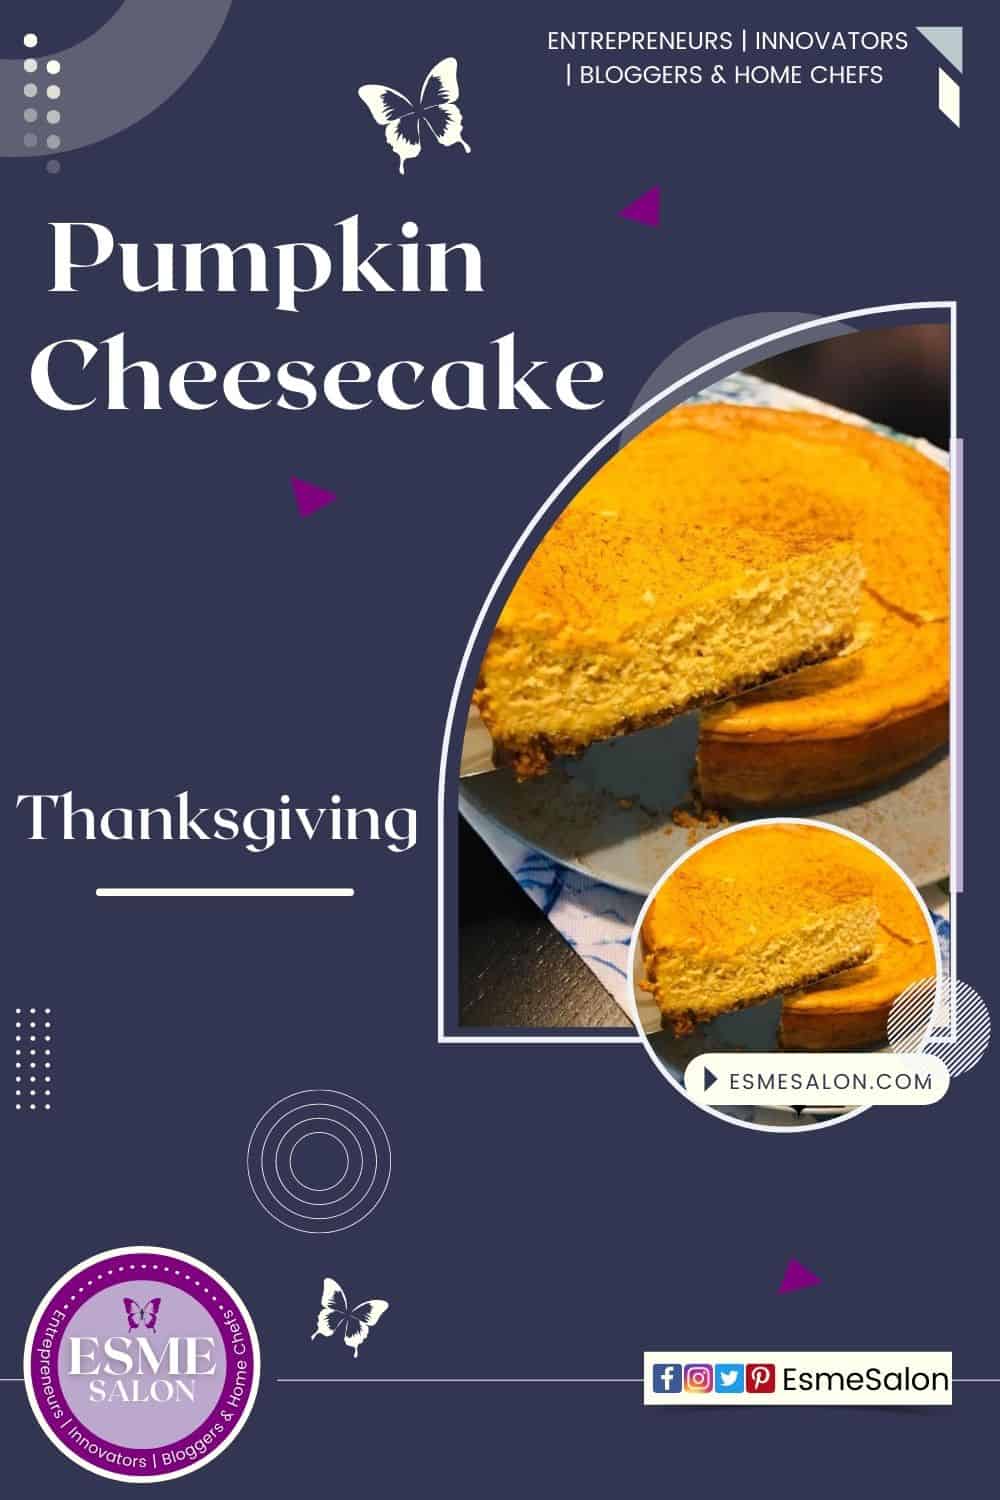 An image of a pumpkin cheesecake and one slice on a cake lifter